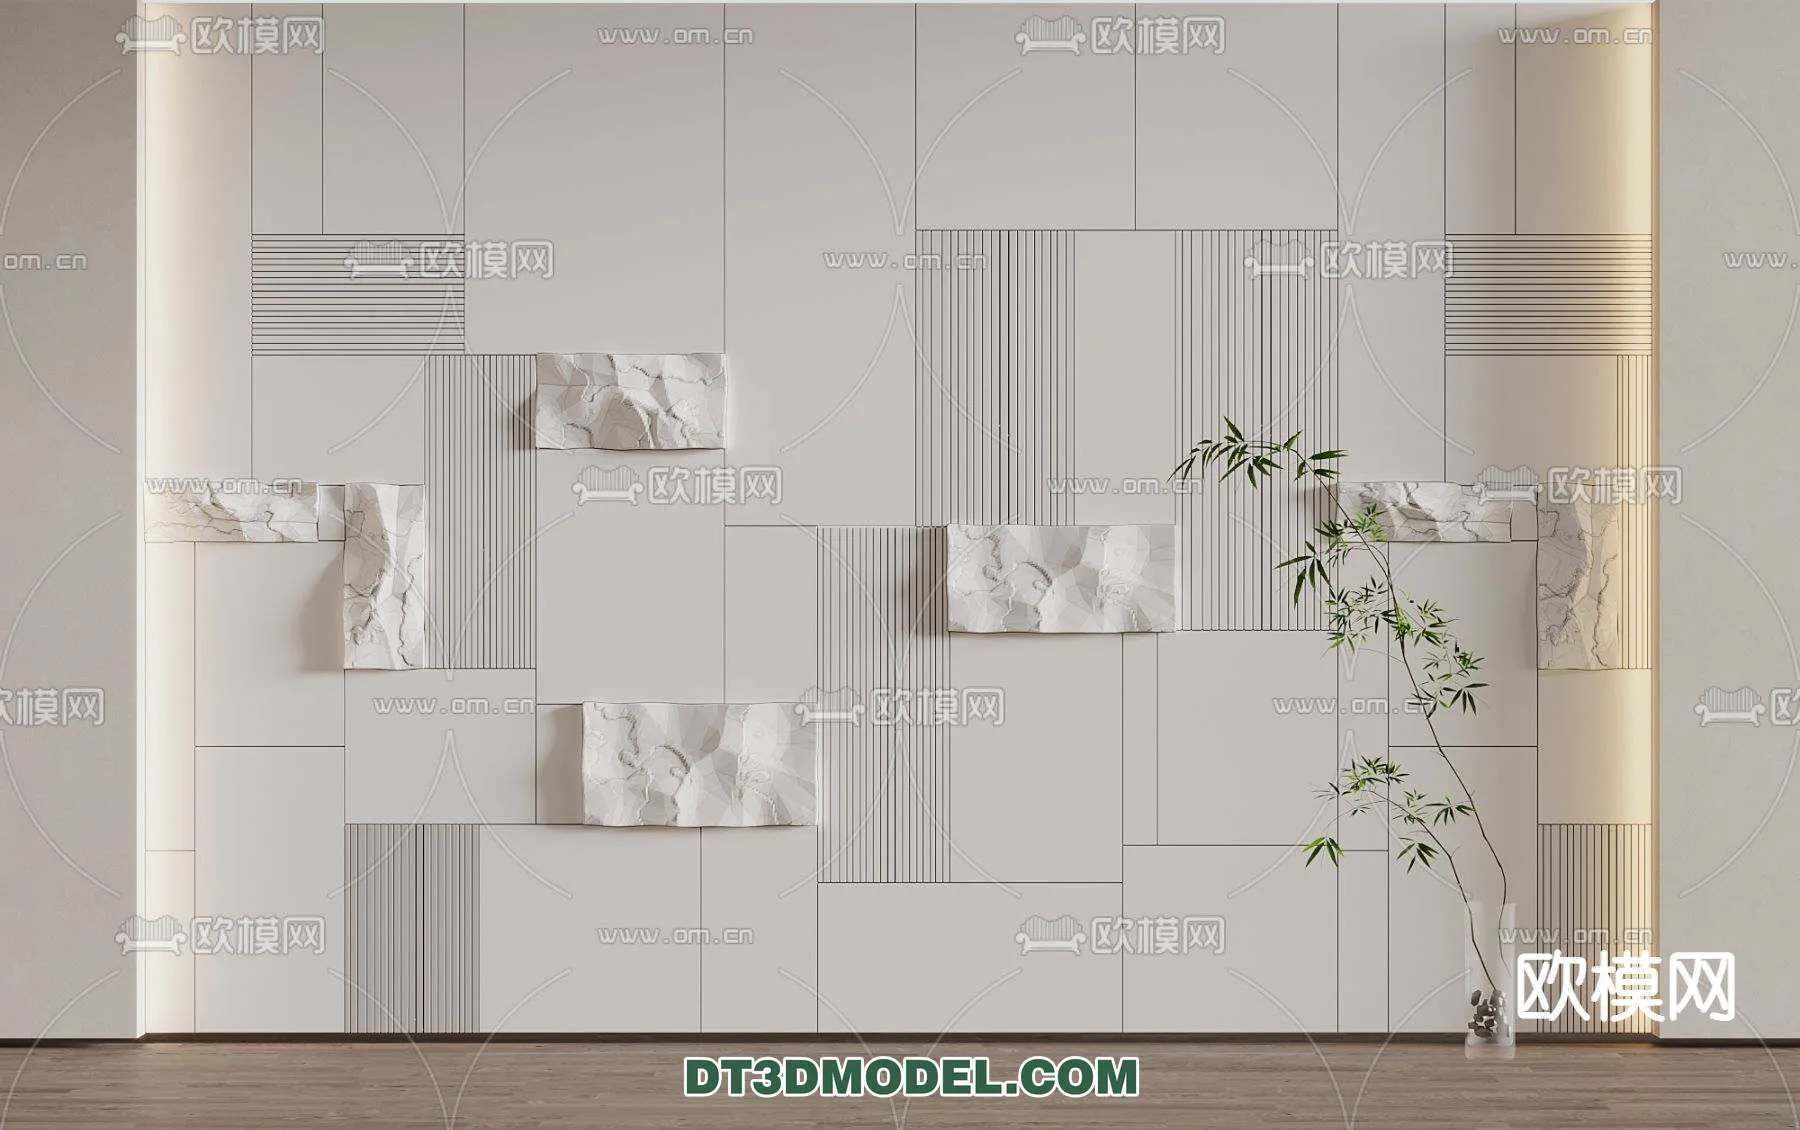 MATERIAL – TEXTURES – ROCK WALL – 0010